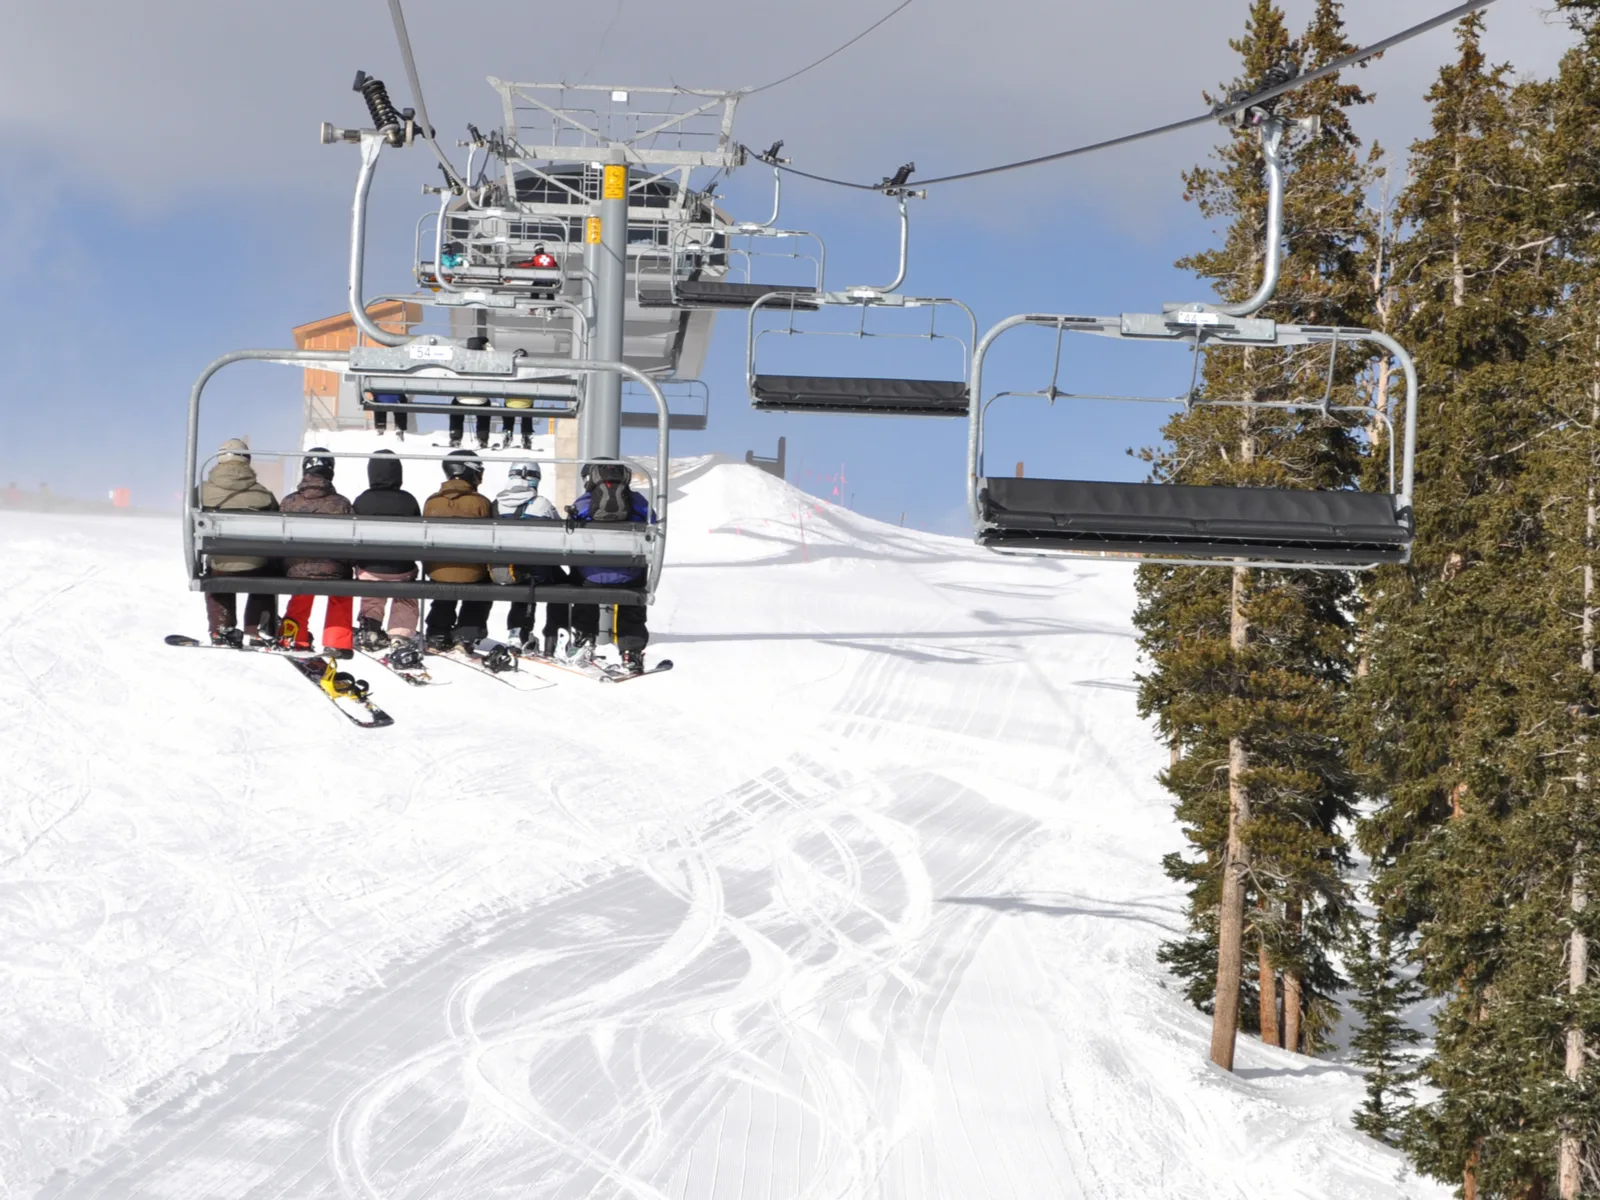 A group of skiers in full gear riding up the chairlift in Keystone Resort, one of the best ski resorts near Denver